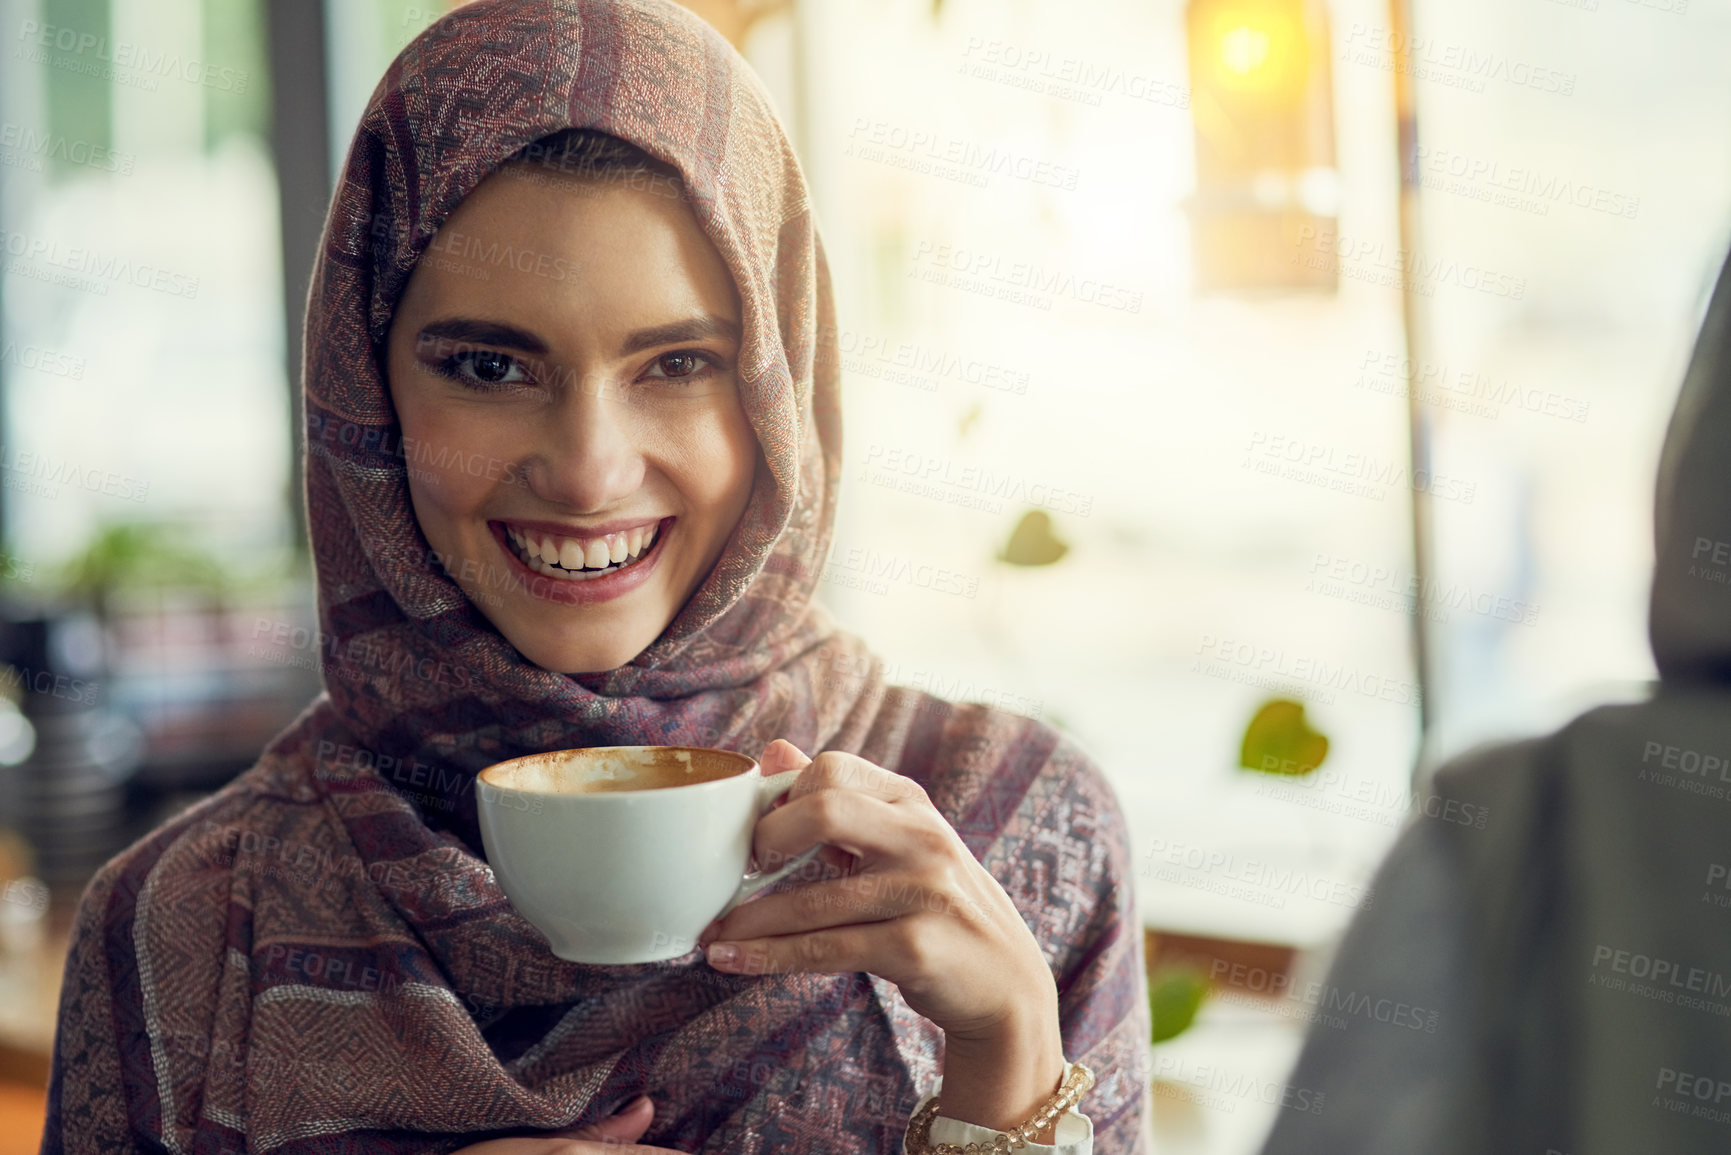 Buy stock photo Shot of a young woman having a coffee with her friend in a cafe